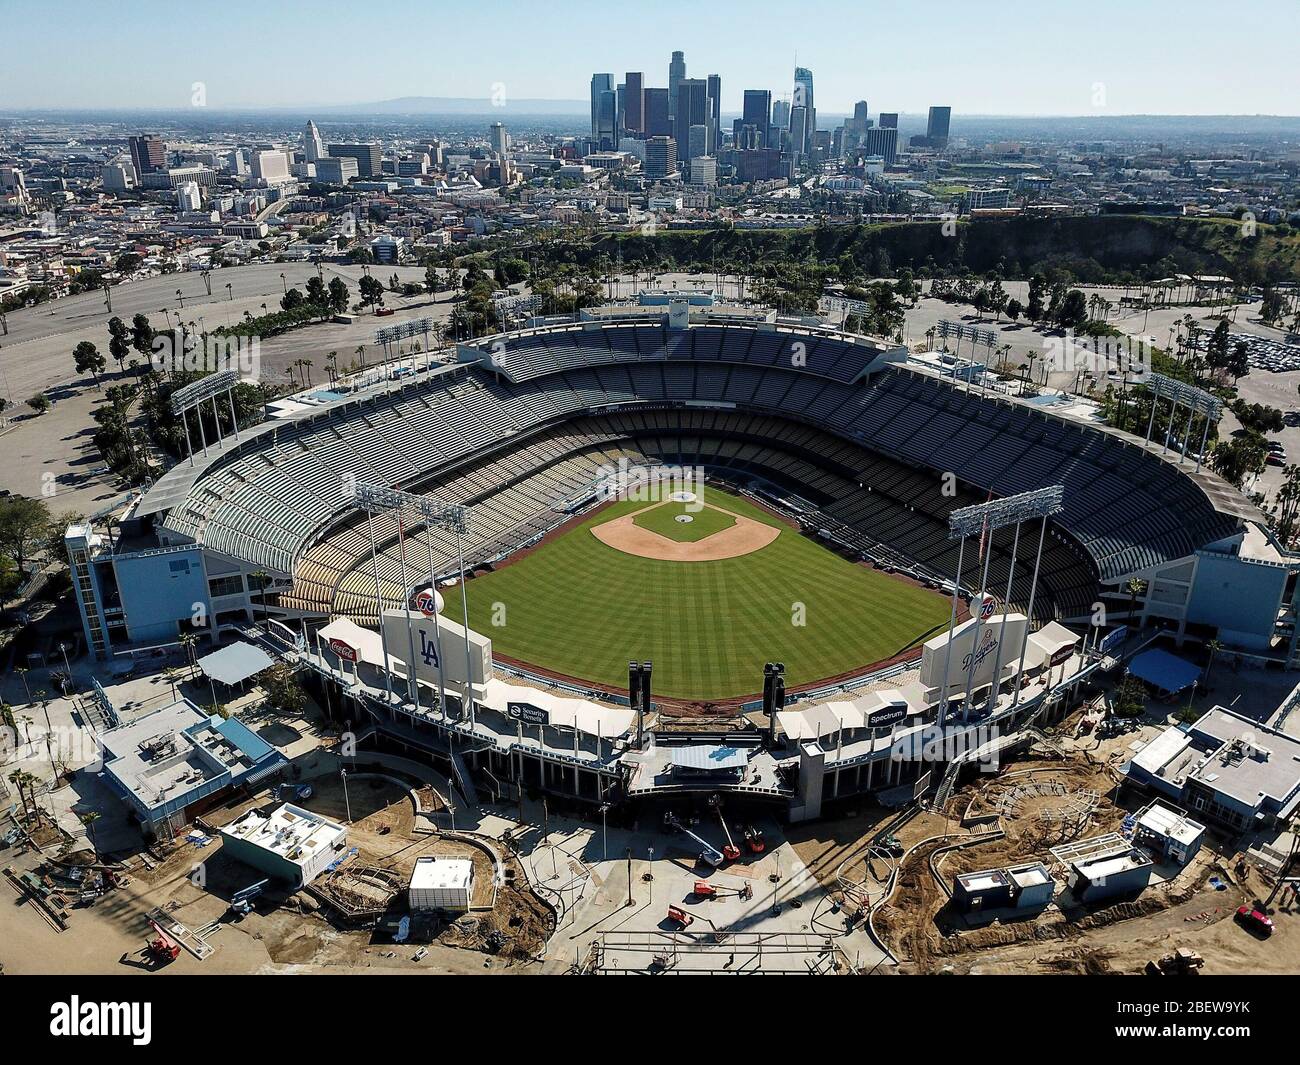 Los Angeles, California, USA. 15th Apr, 2020. An aerial view shows the Los Angeles Dodgers Stadium with downtown Los Angeles skyline in background on April 15, 2020. Los Angeles Mayor Eric Garcetti said today he doesn't foresee large gatherings, such as sporting events and concerts, happening in the city until 2021, as the region continues to reel from the COVID-19 pandemic. Credit: Ringo Chiu/ZUMA Wire/Alamy Live News Stock Photo